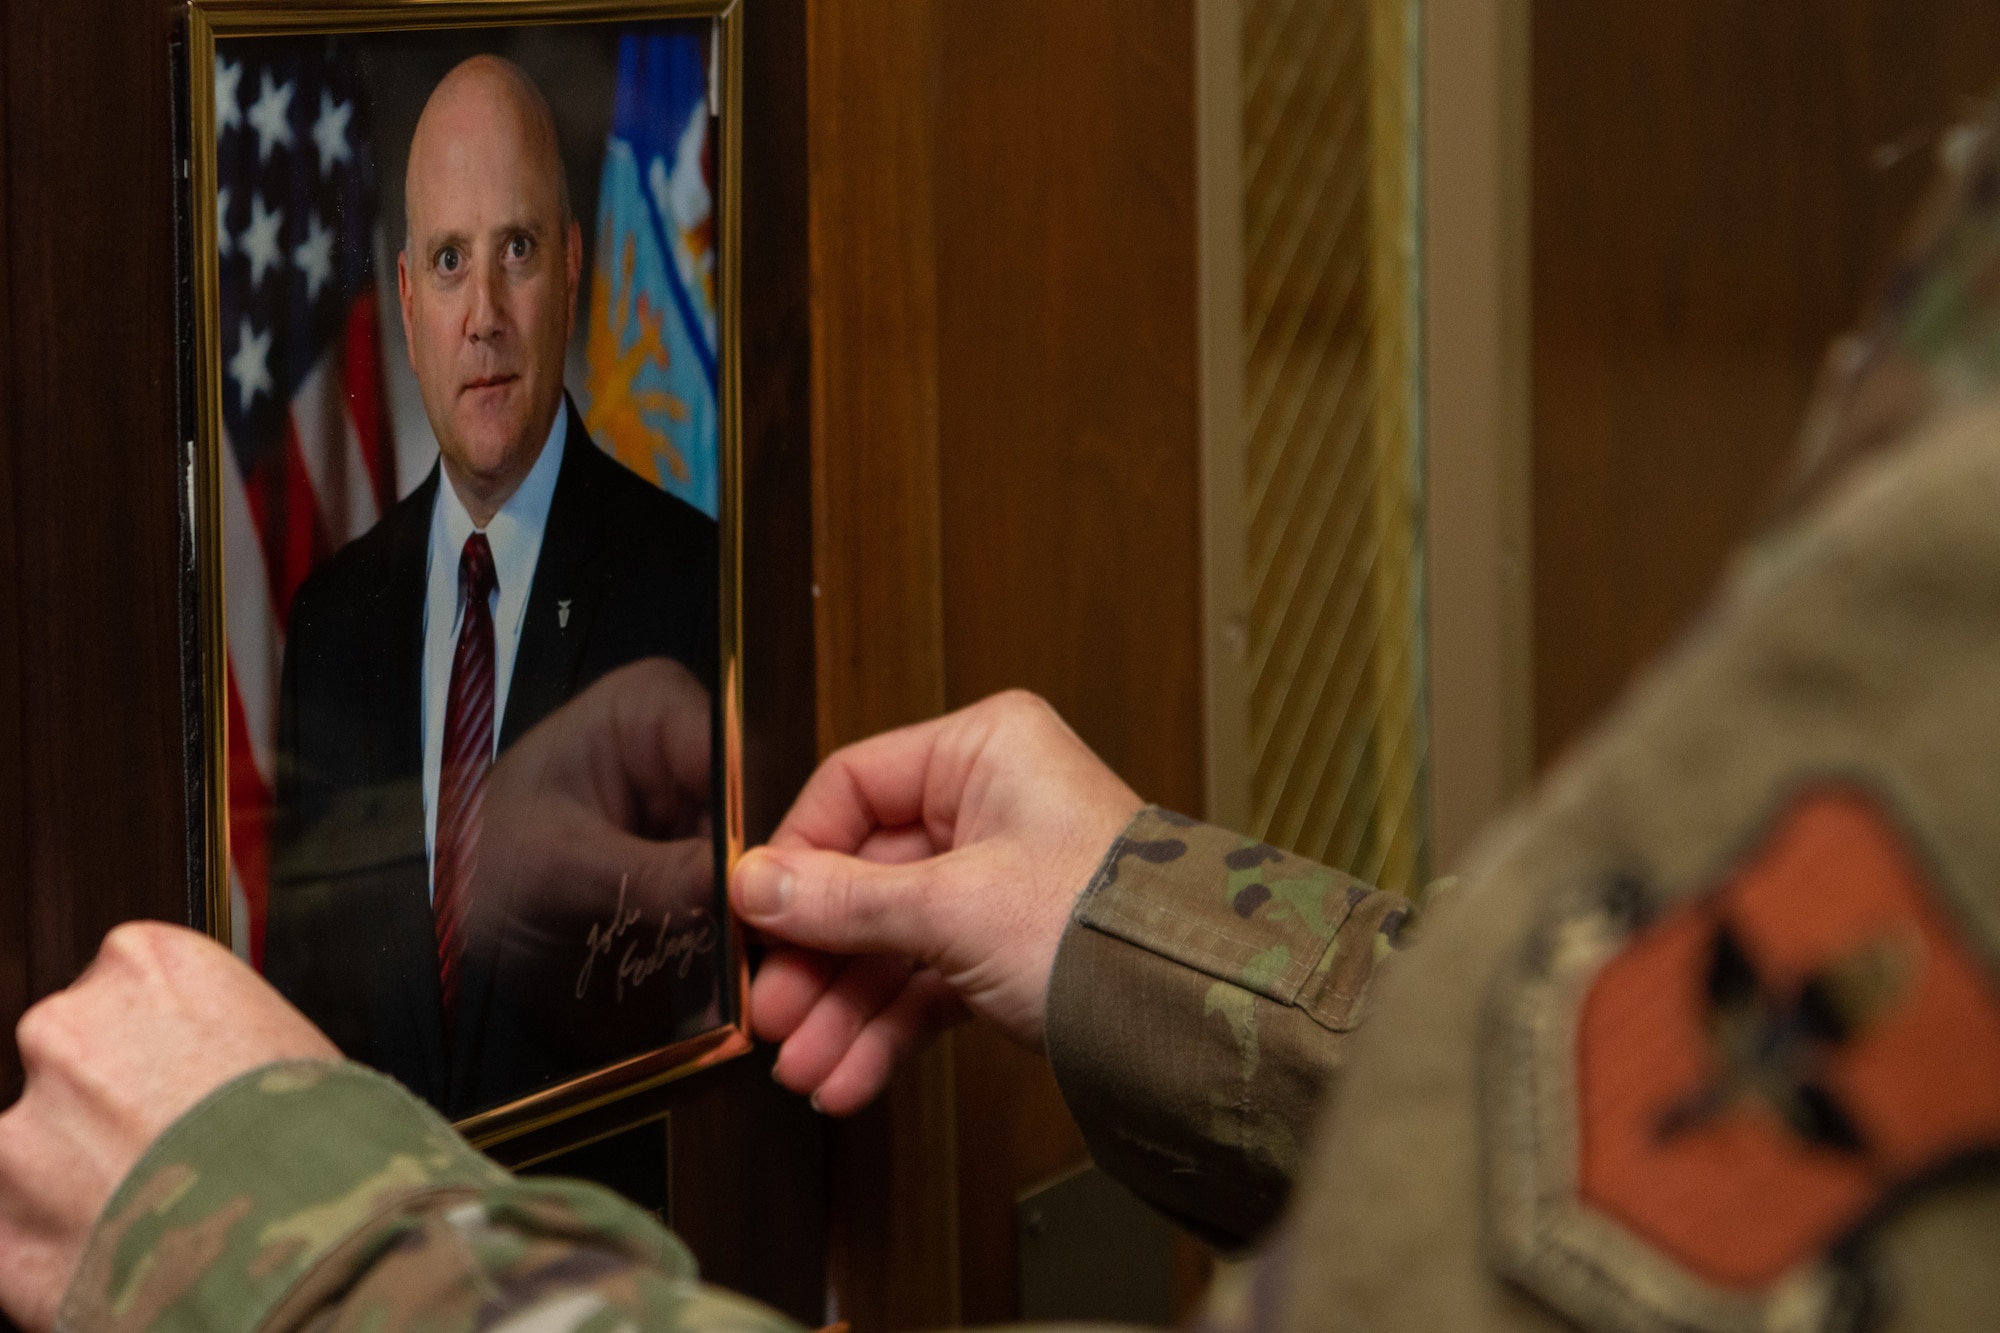 Master Sgt. Timothy Watson, Air Force Enlisted Heritage Research Institute superintendent, places John Fedrigo’s portrait inside his plaque on the Enlisted Heritage Hall Wall of Achievers during an induction ceremony on Maxwell-Gunter Annex, Alabama, June 21, 2021. The Wall of Achievers recognizes enlisted Airmen like Fedrigo, who served from 1981-2002, who attain fame or notoriety to include general officers, authors, actors and politicians.